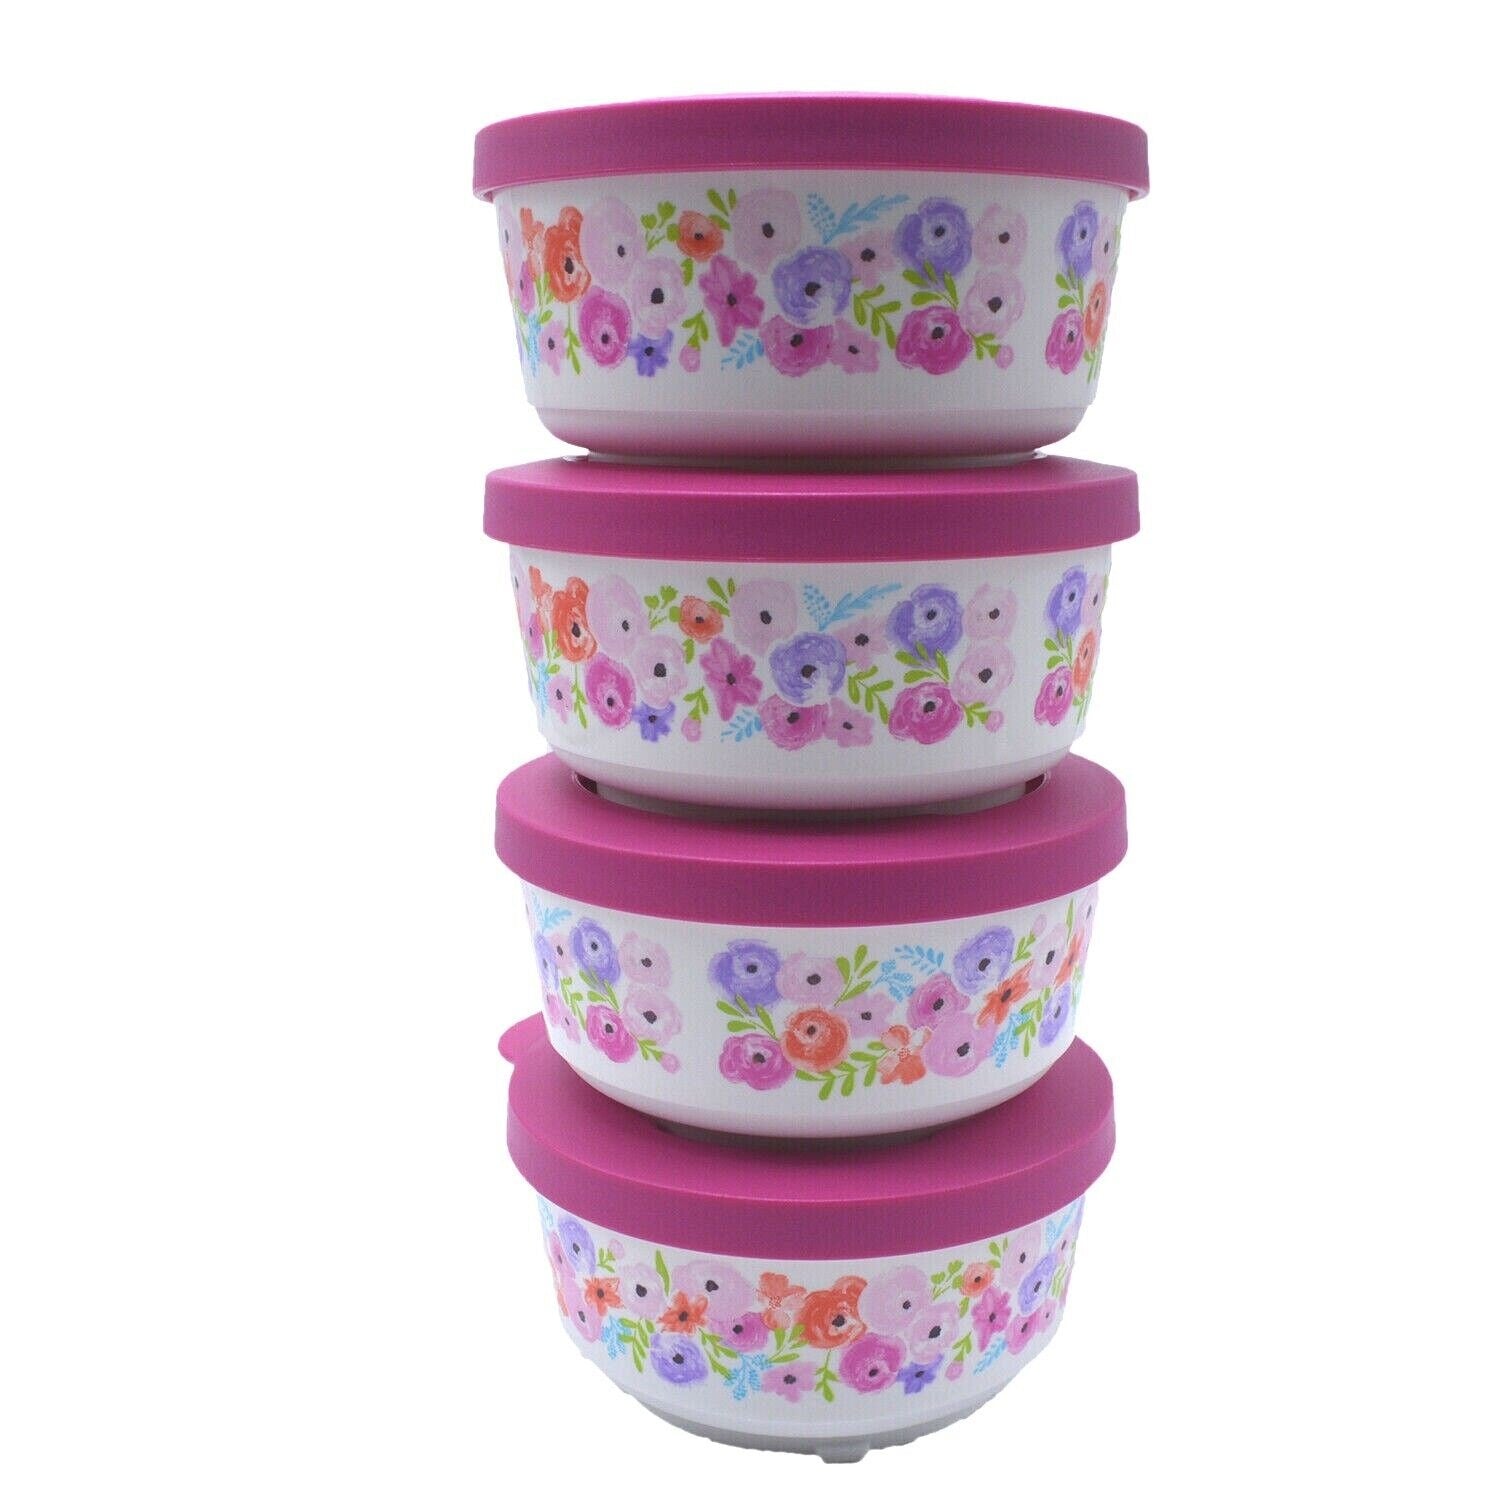 NEW Tupperware Snack Stor Large 9X13 container Pink Purple seal